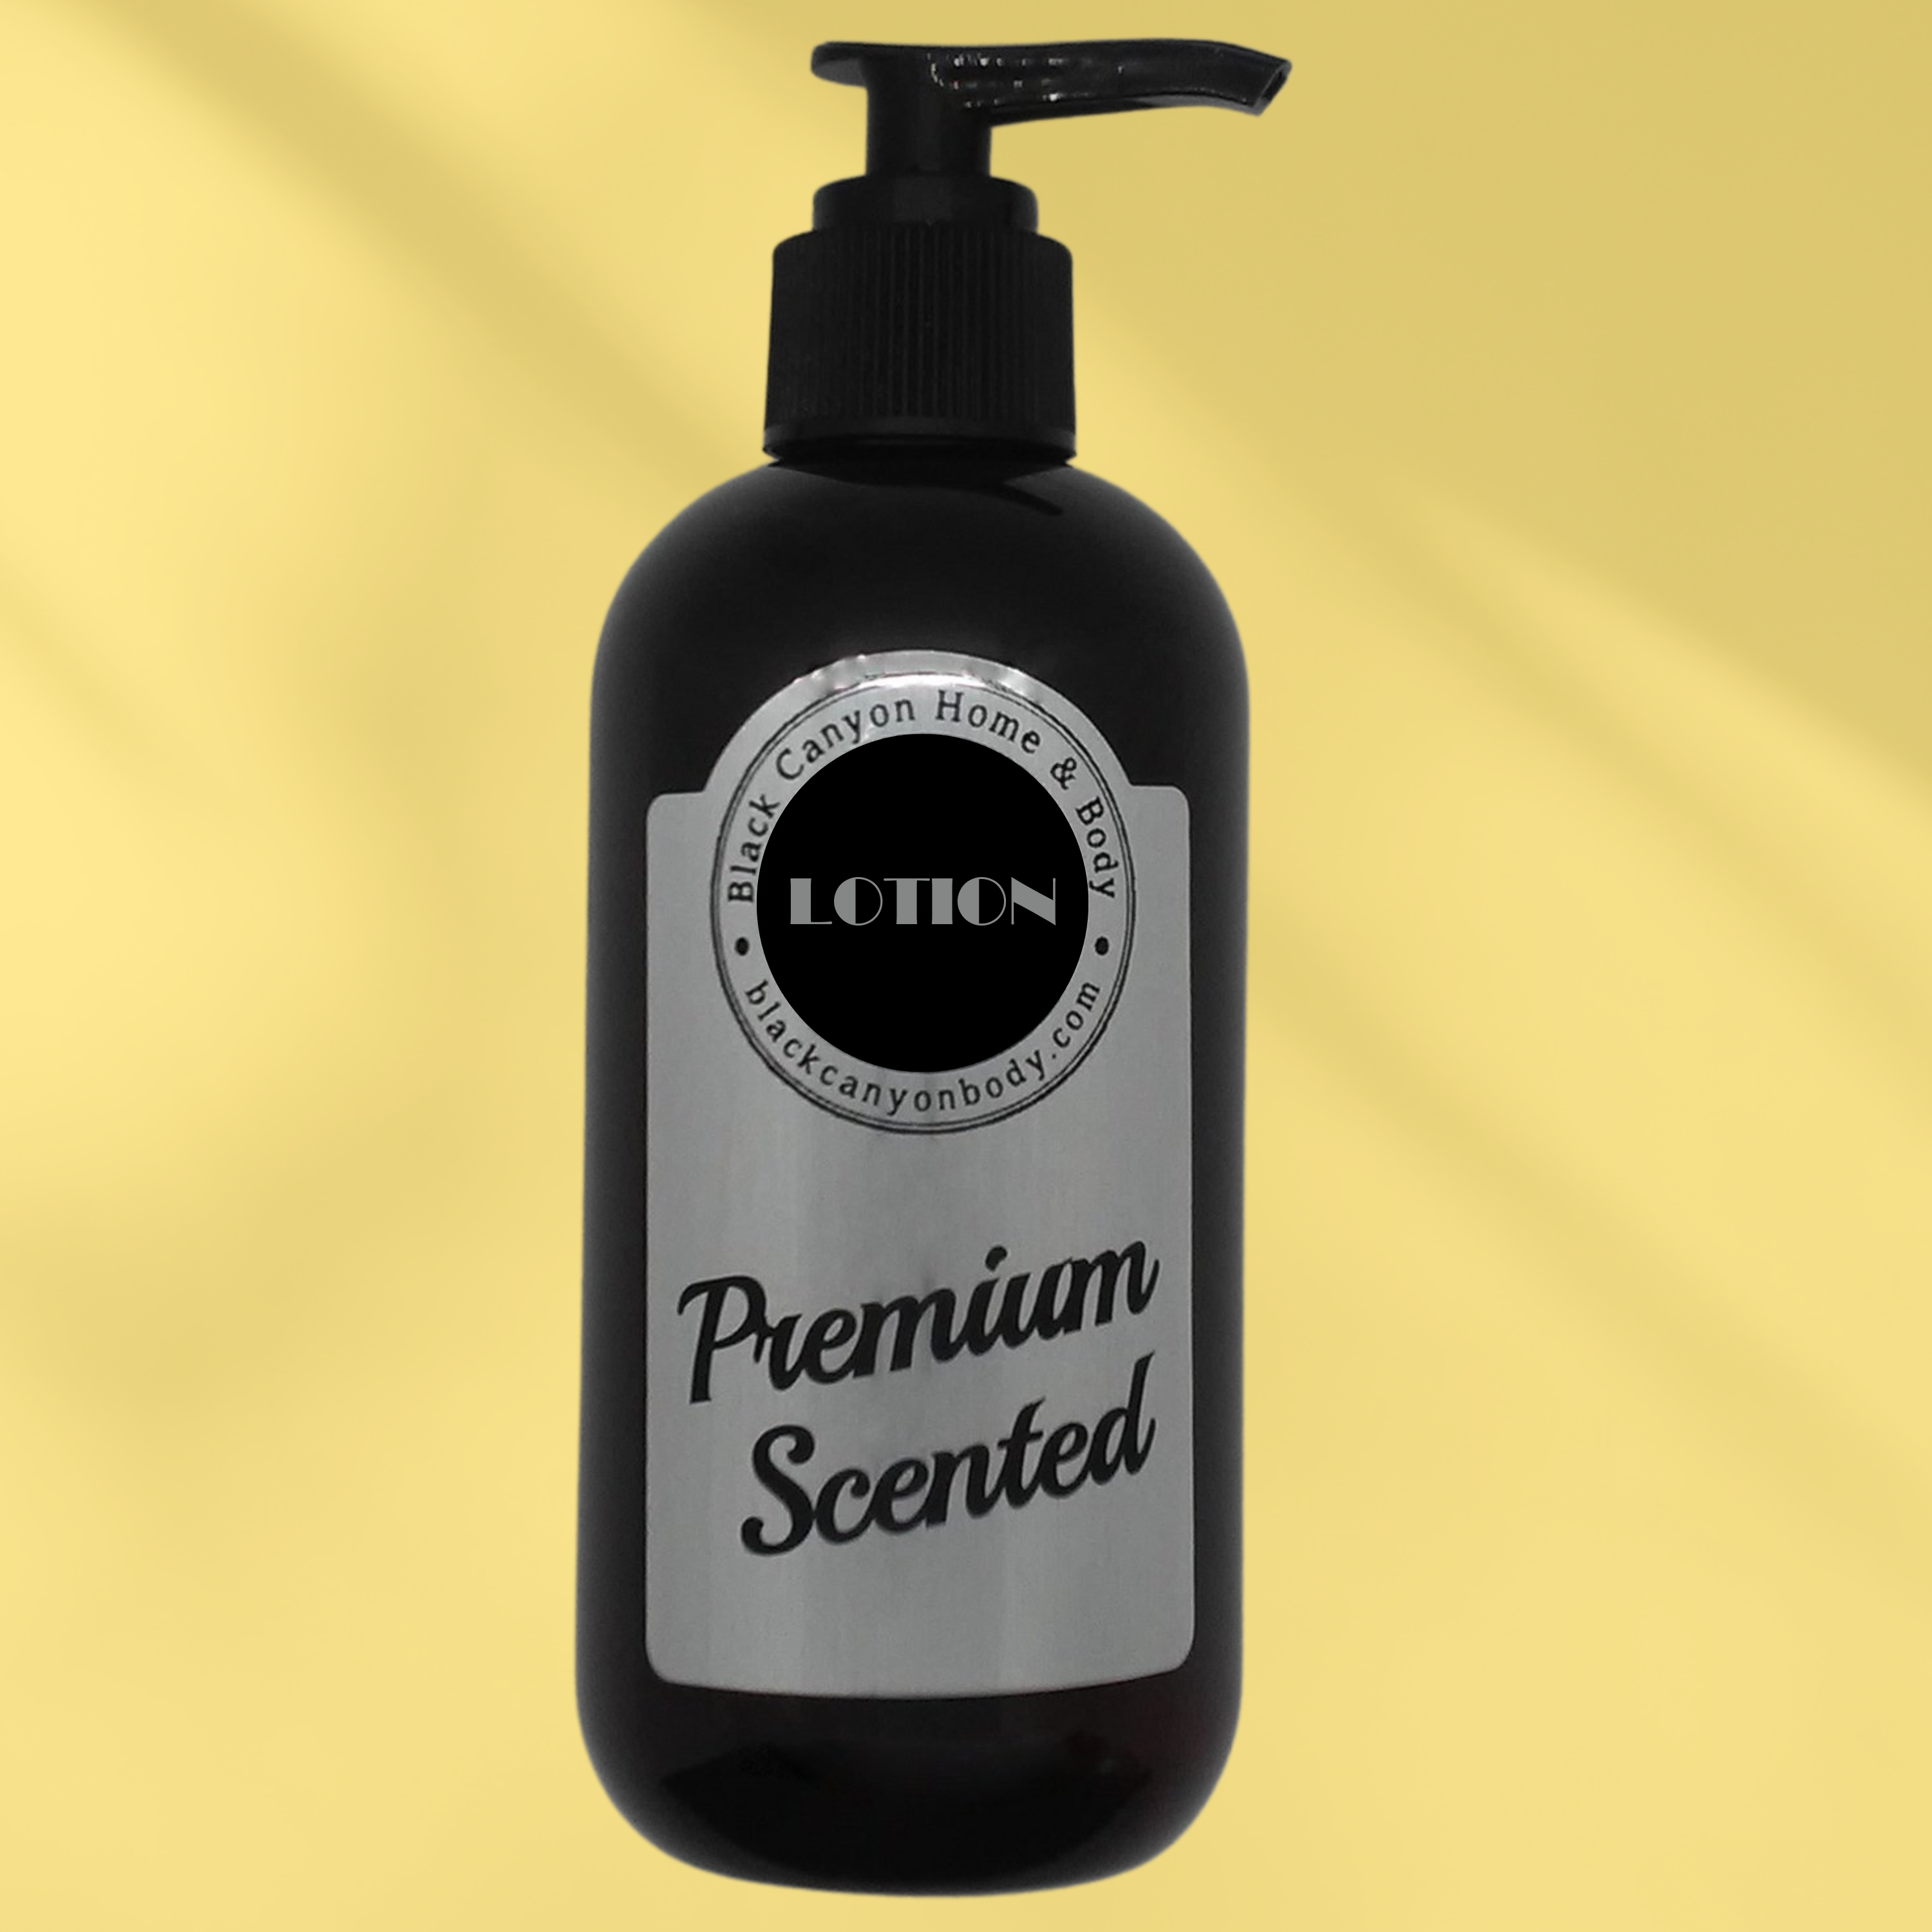 Paydens Cobalt Bay Rum & Tobacco Scented Luxury Body Lotion with Lanolin and Jojoba Oil For Men